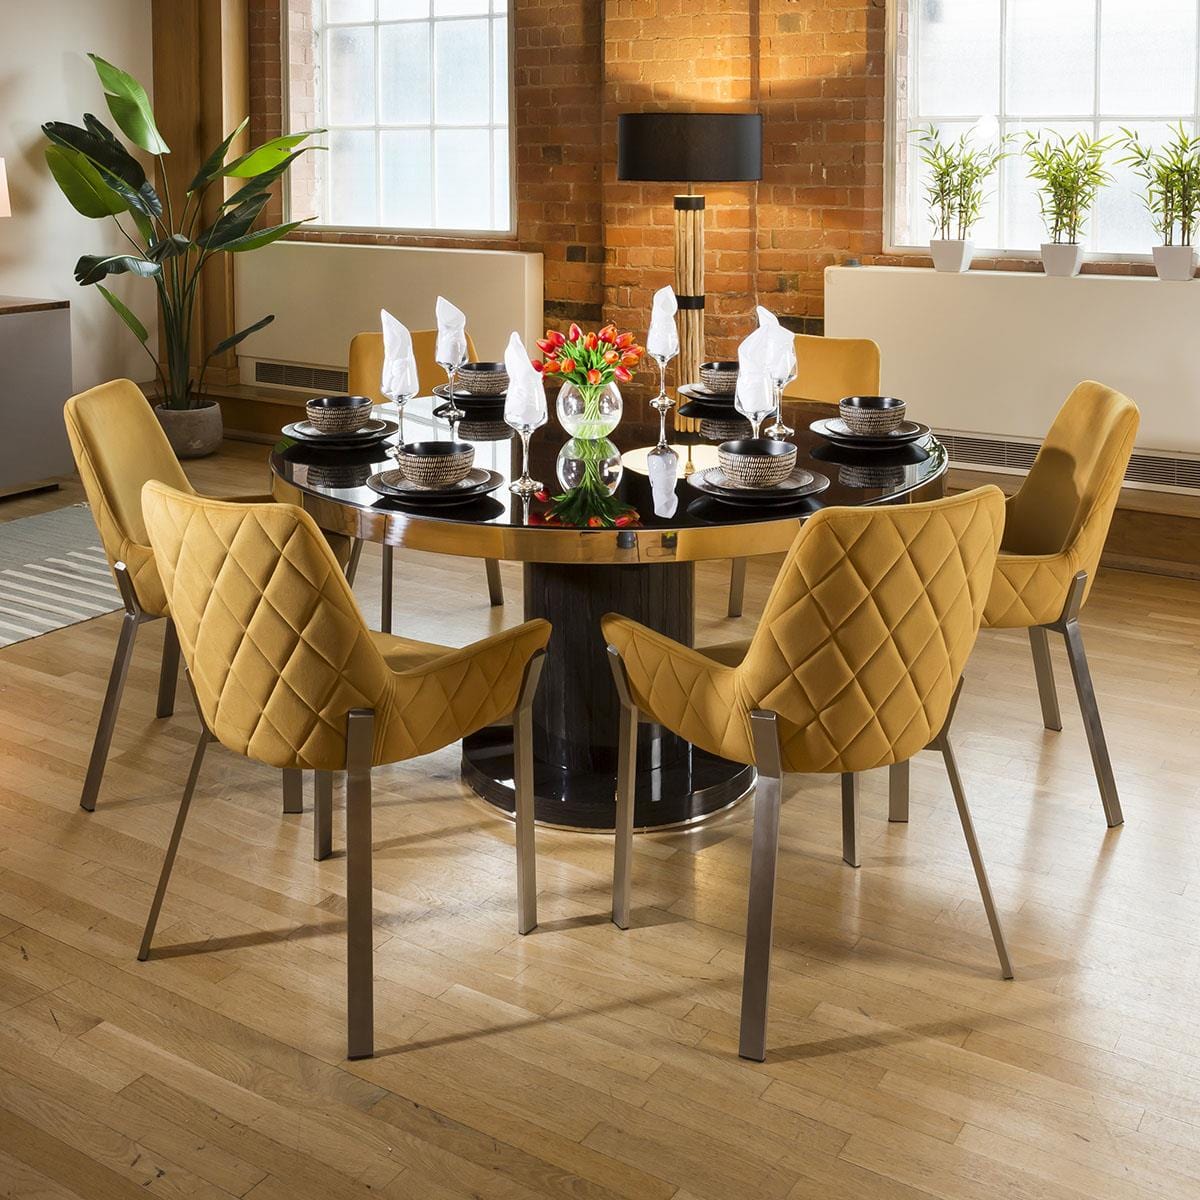 Quatropi Round Smoked Oak Dining Table Set 6 Mustard & Stainless Chairs